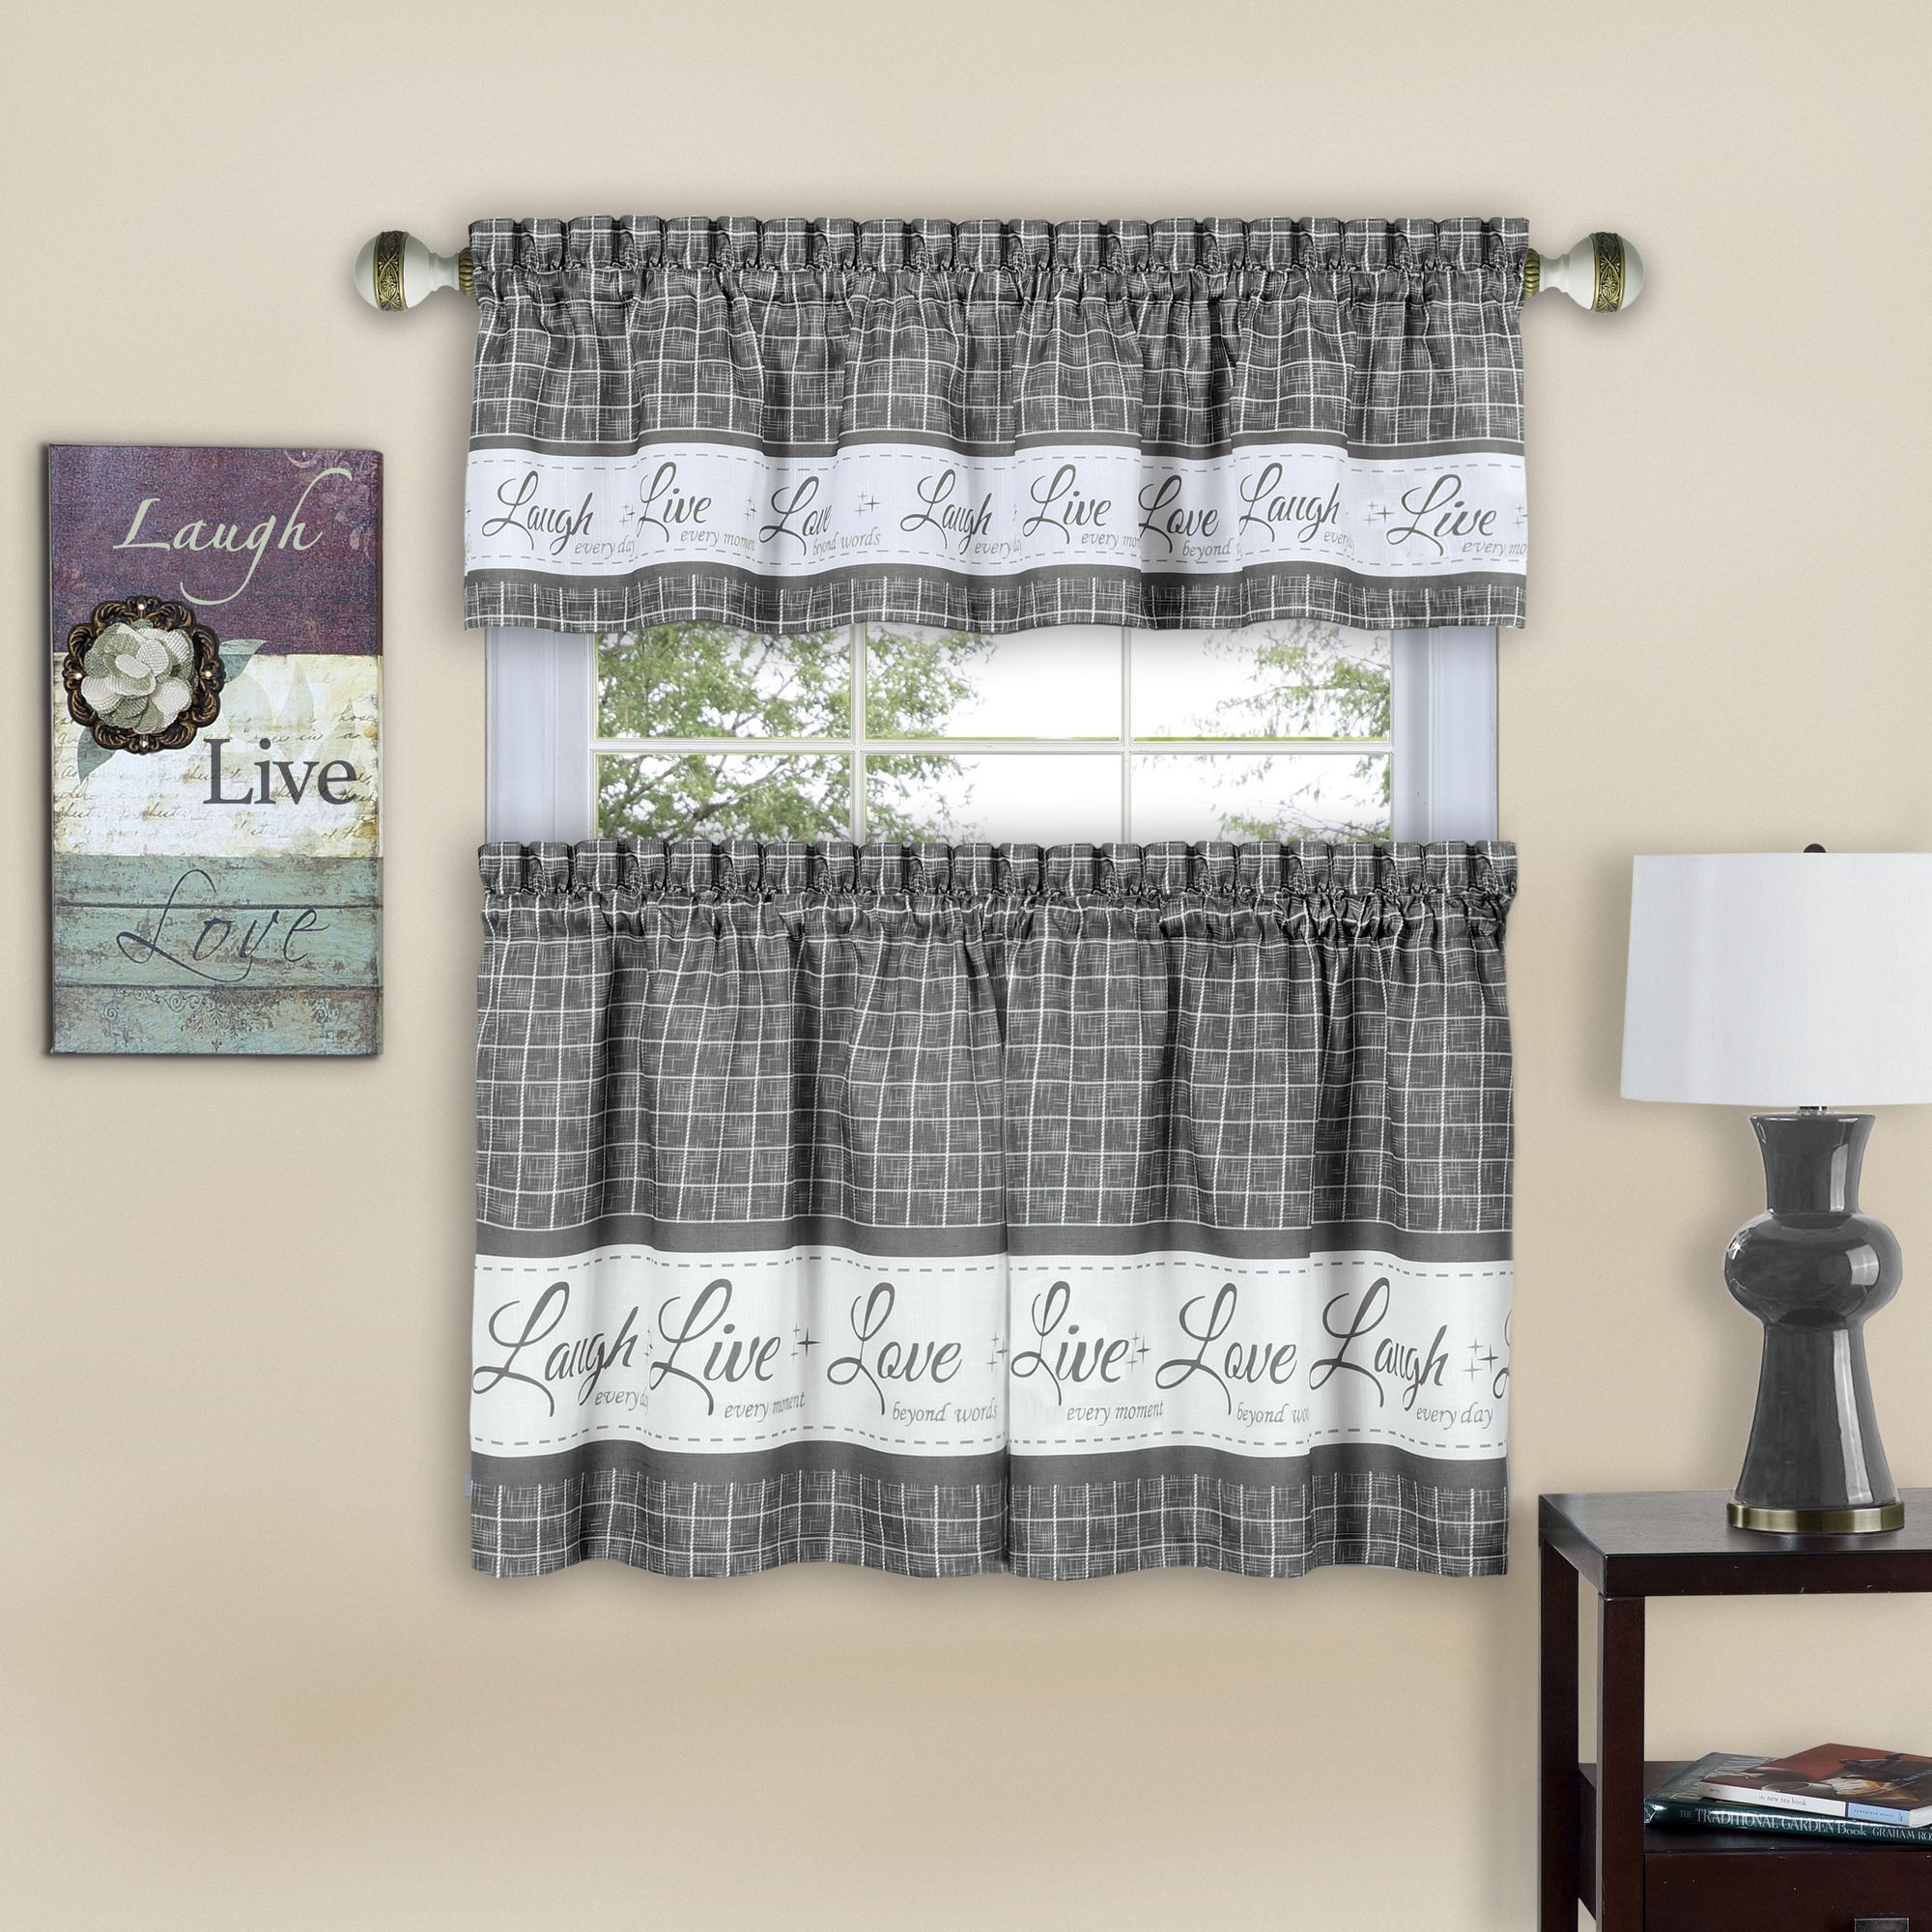 Home In 2019 | Kitchen Curtain Sets, Curtains, Kitchen Within Kitchen Window Tier Sets (View 1 of 20)